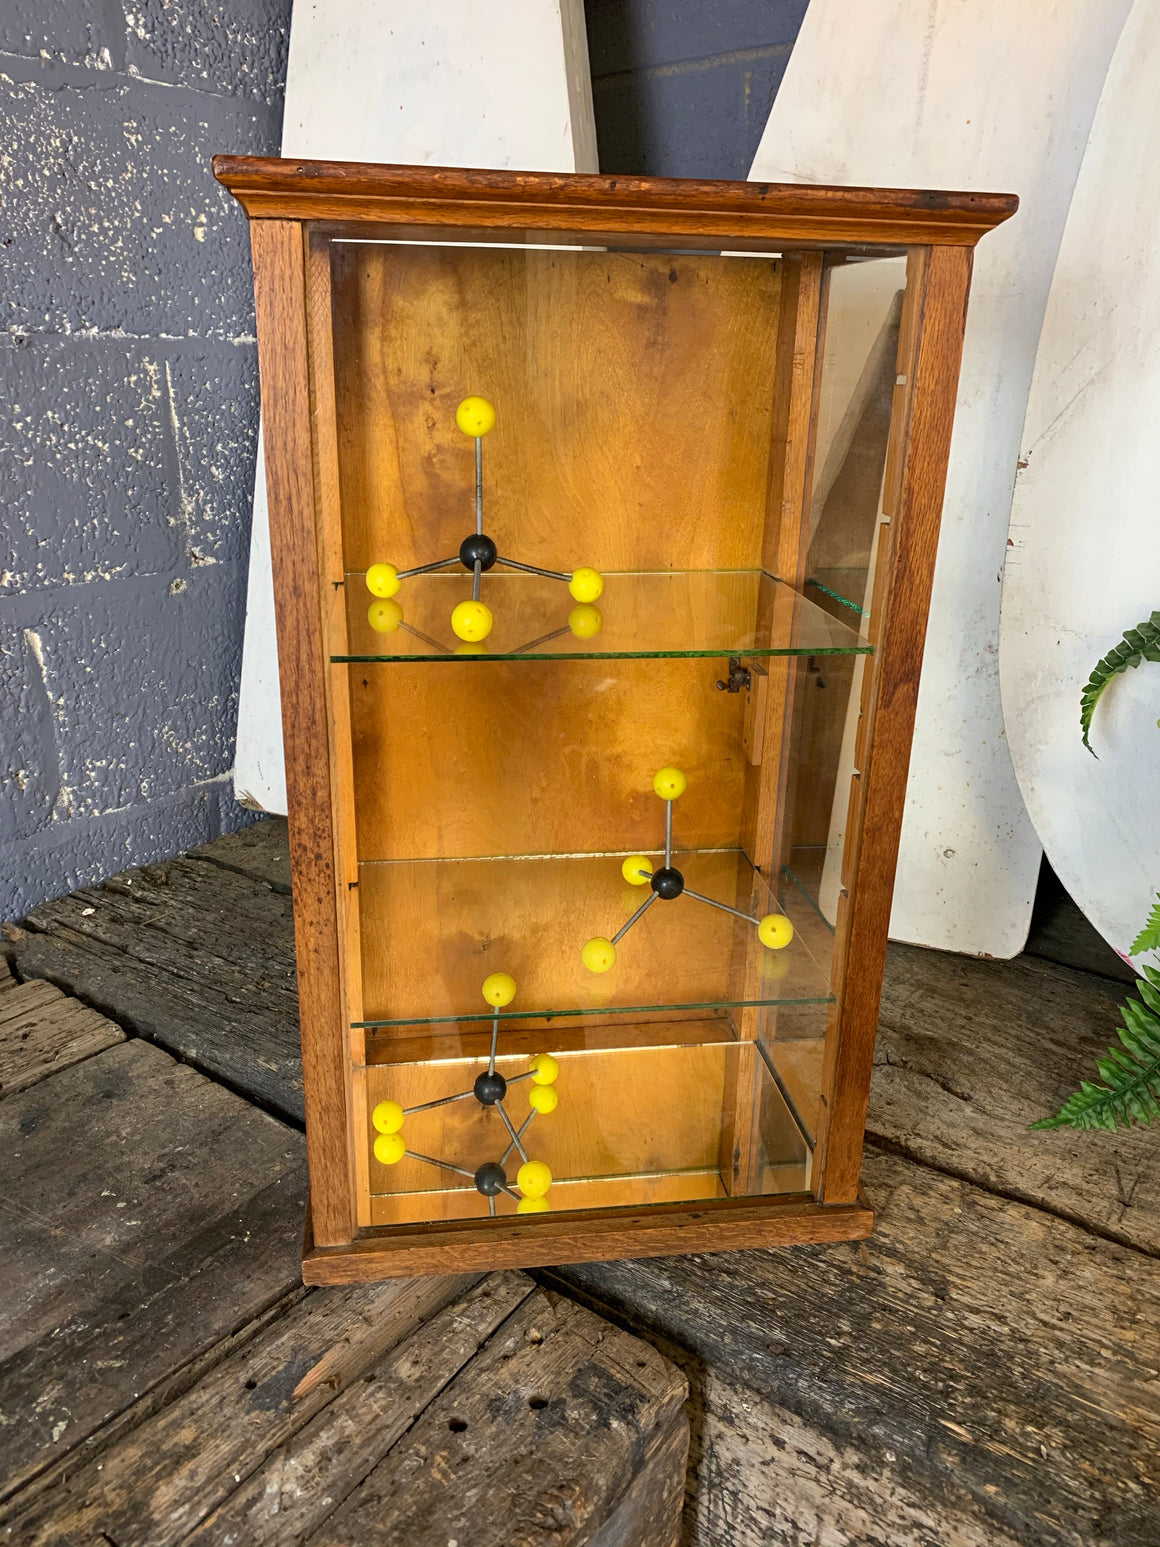 A shop counter display cabinet by Cresswell Brothers of Kentish Town